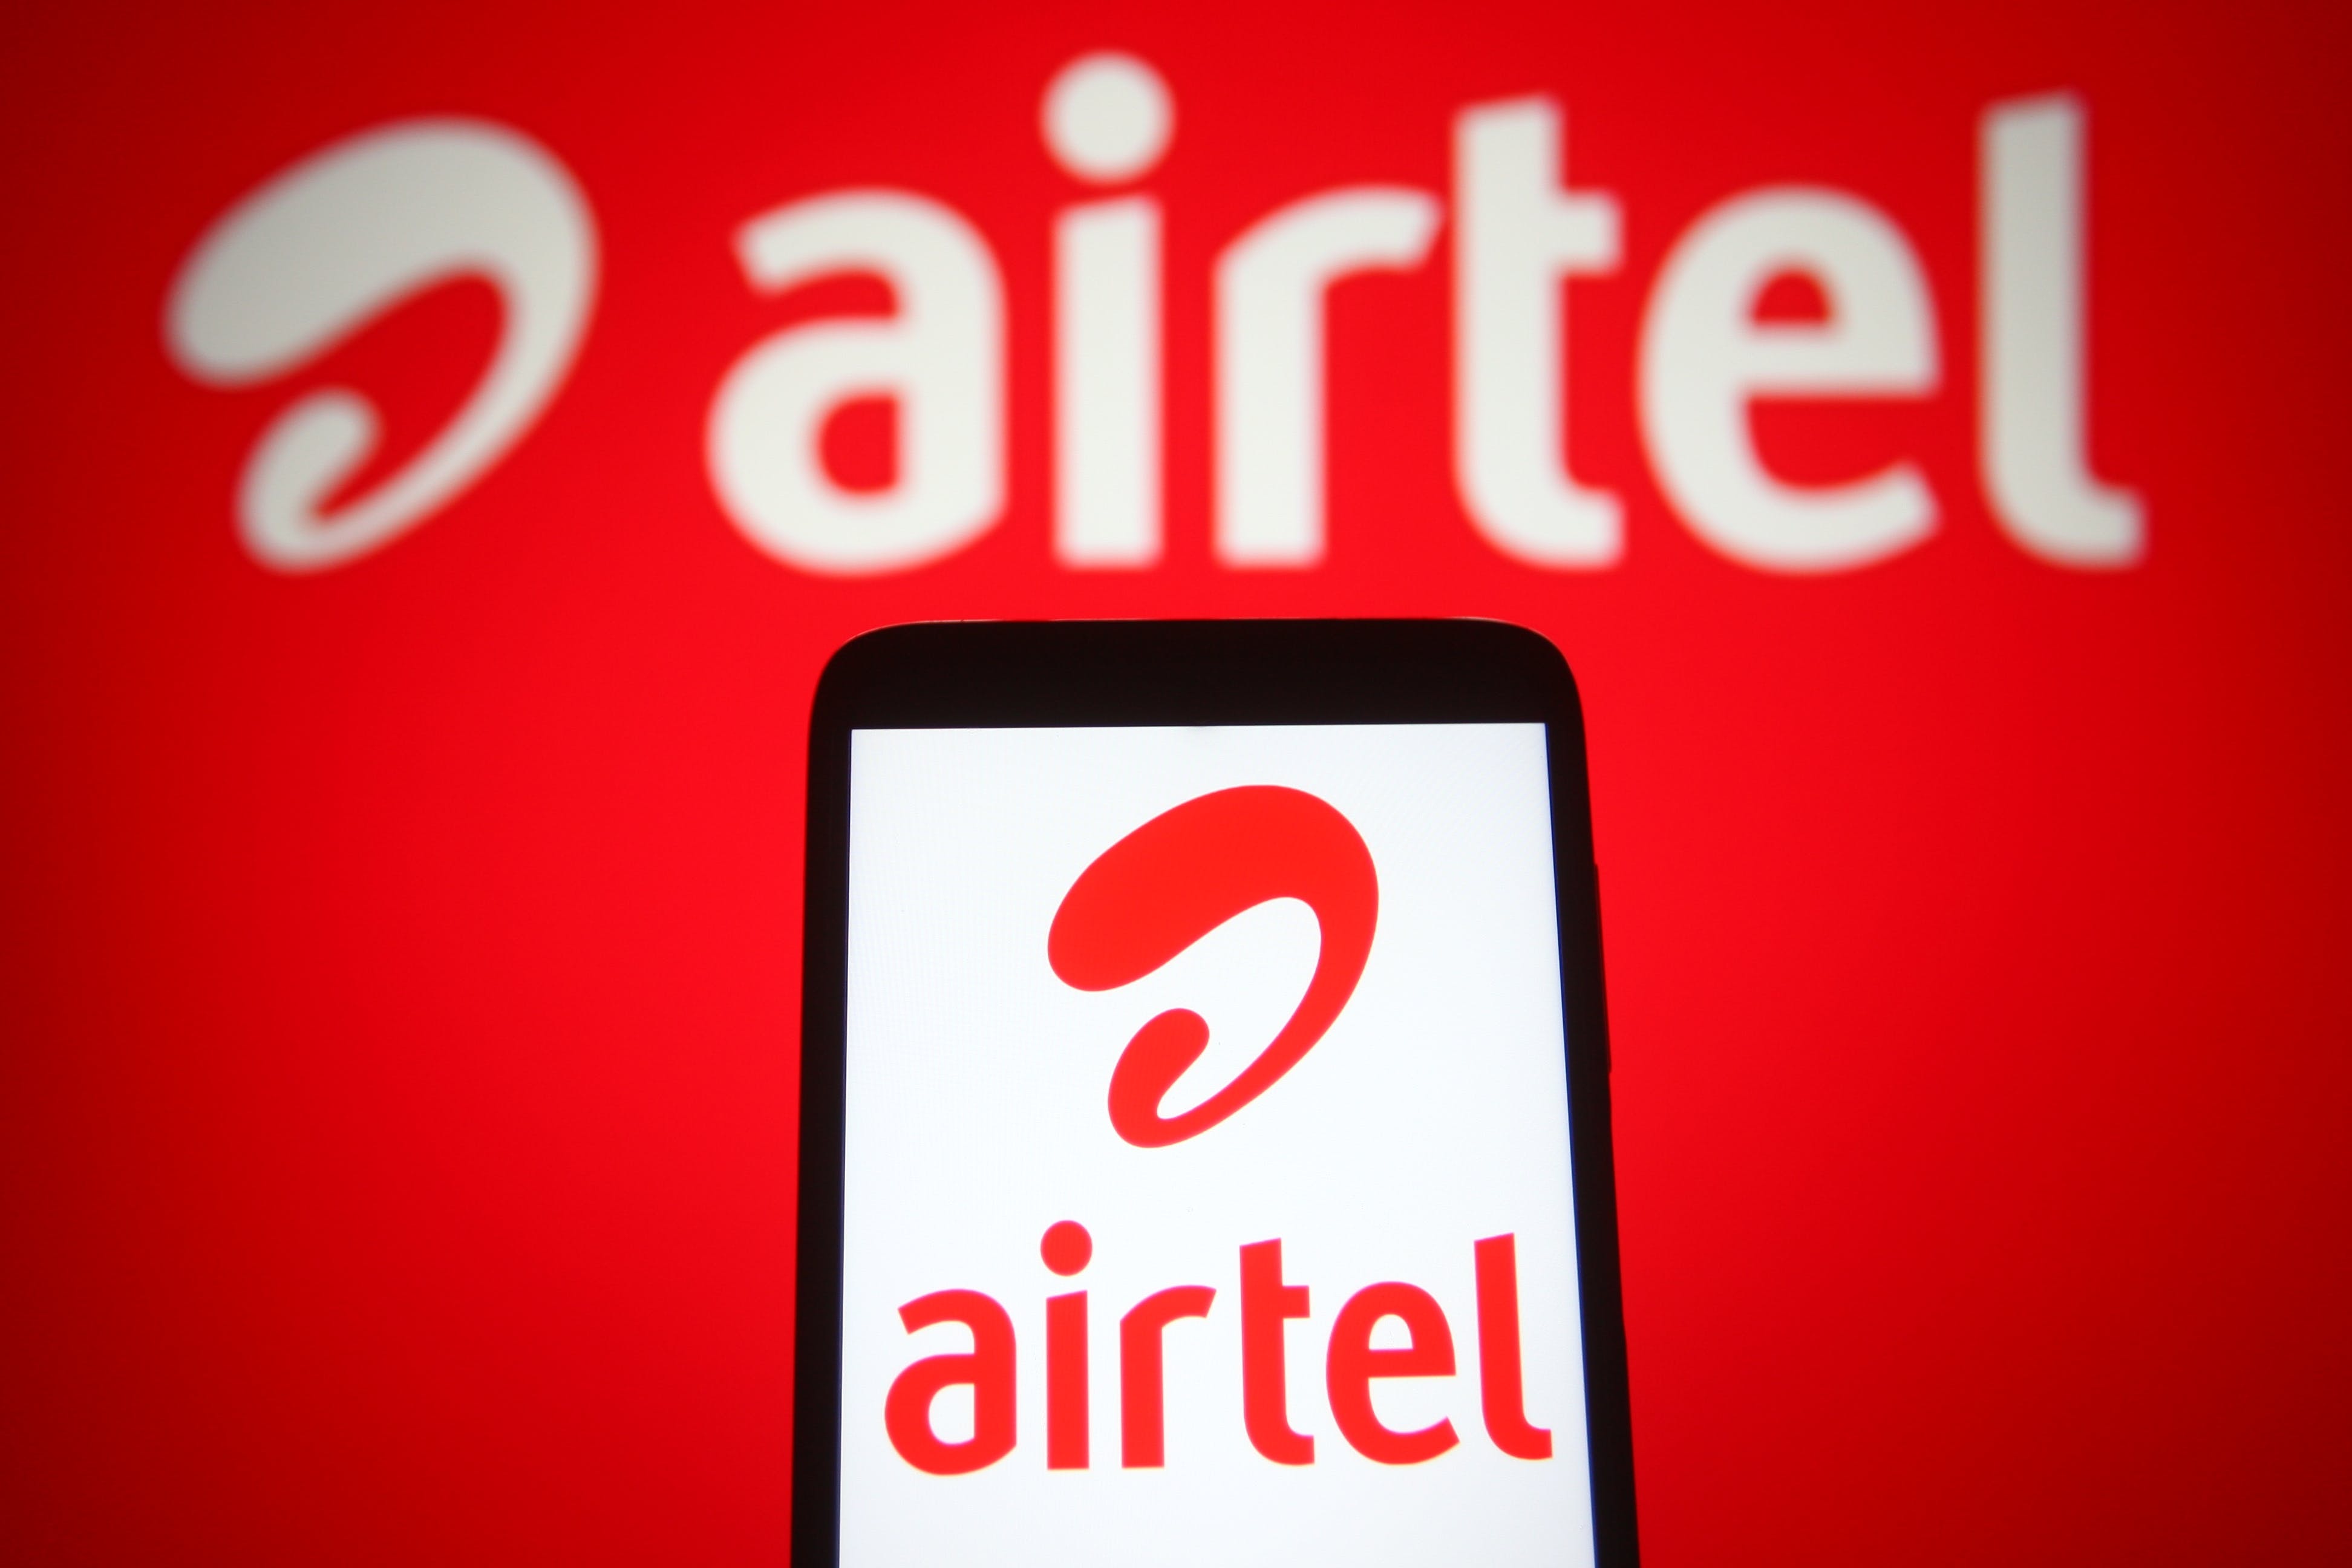 How to subscribe to Airtel Night Plan - New UNLIMITED code